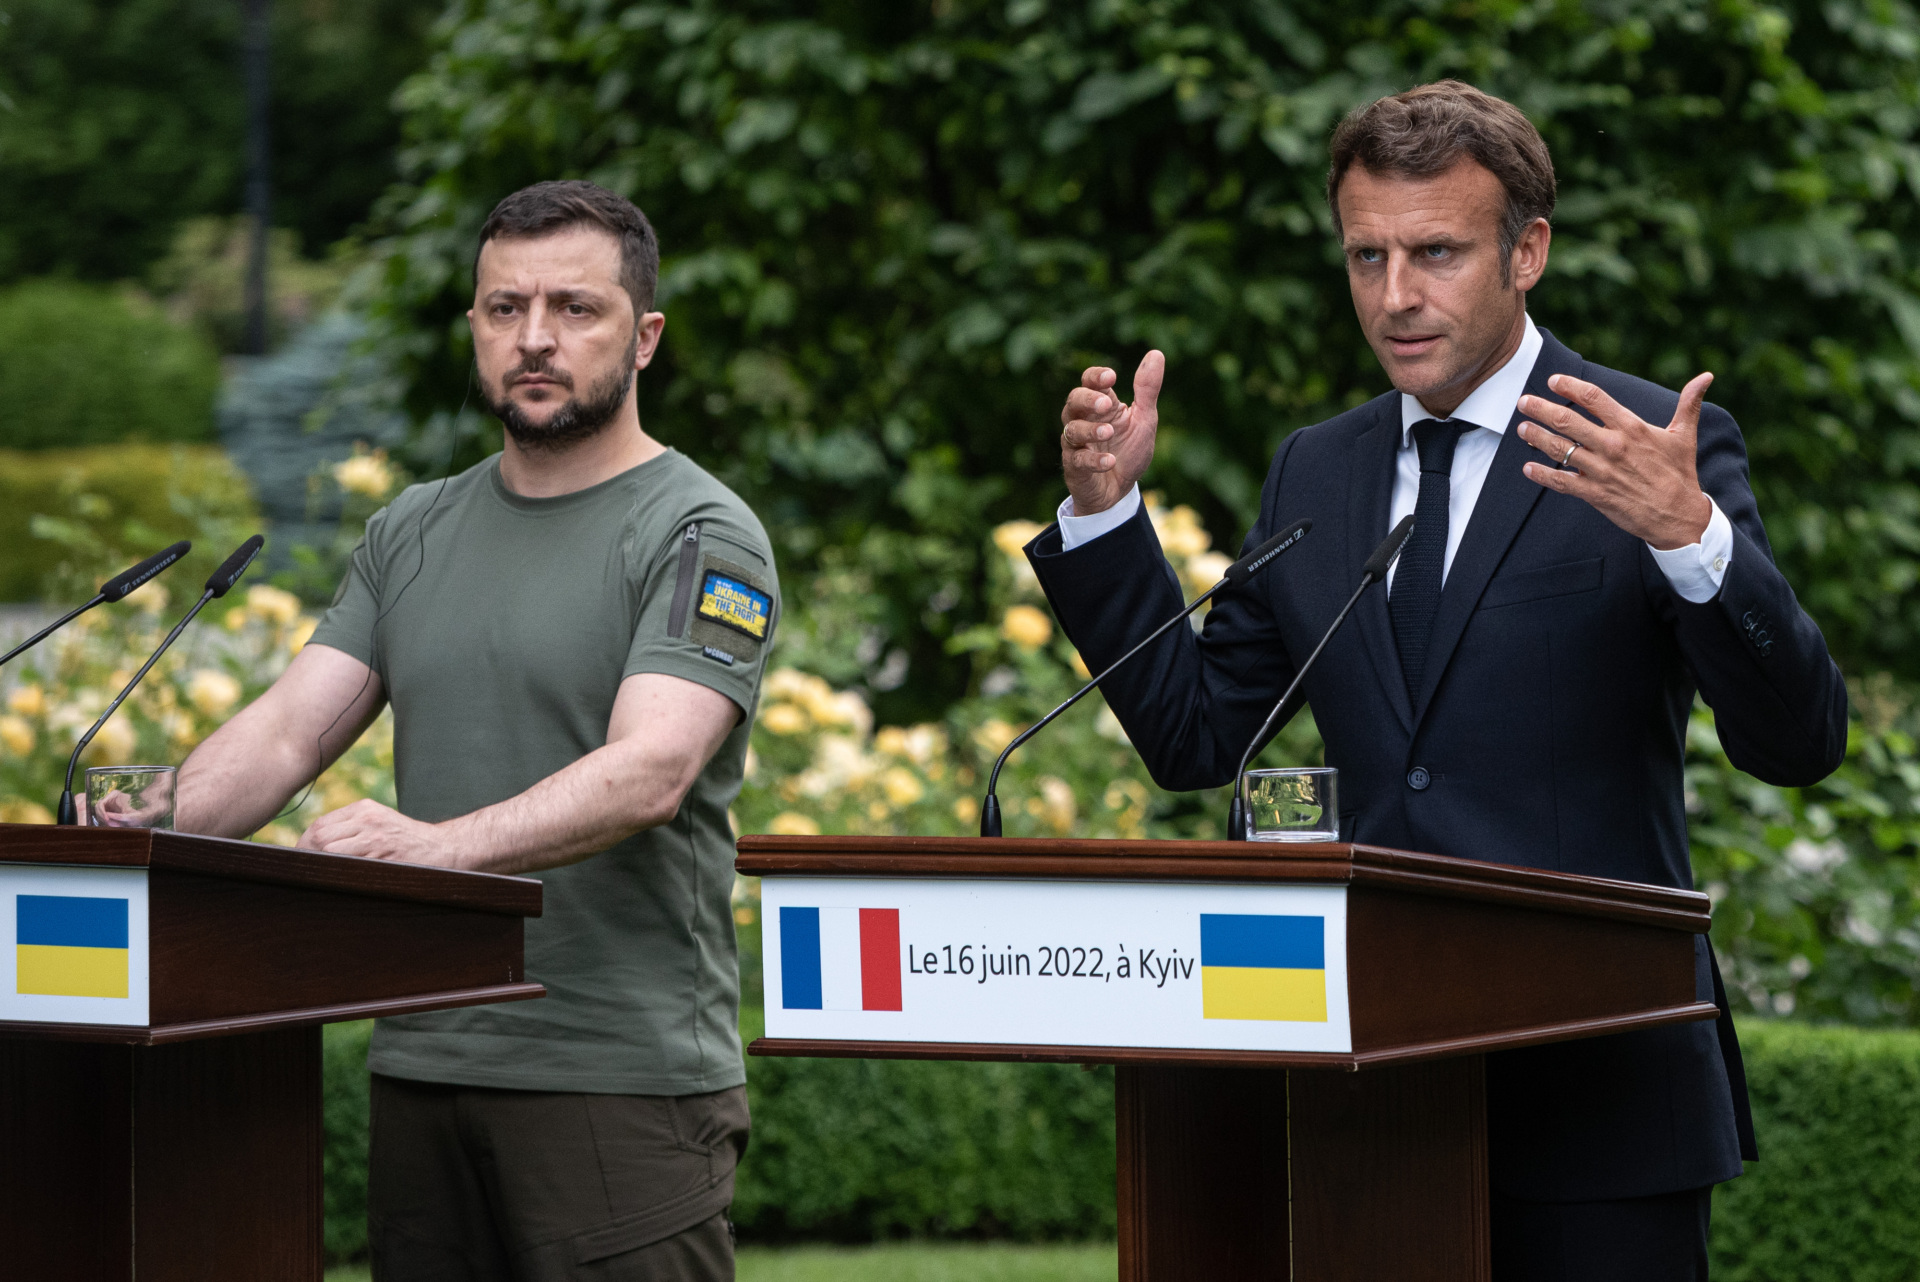 KYIV, UKRAINE - JUNE 16: Ukrainian President Volodymyr Zelensky and Frances President Emmanuel Macron are seen during a press conference on June 16, 2022 in Kyiv, Ukraine. The leaders made their first visits to Ukraine since the country was invaded by Russia on February 24th. (Photo by Alexey Furman/Getty Images)